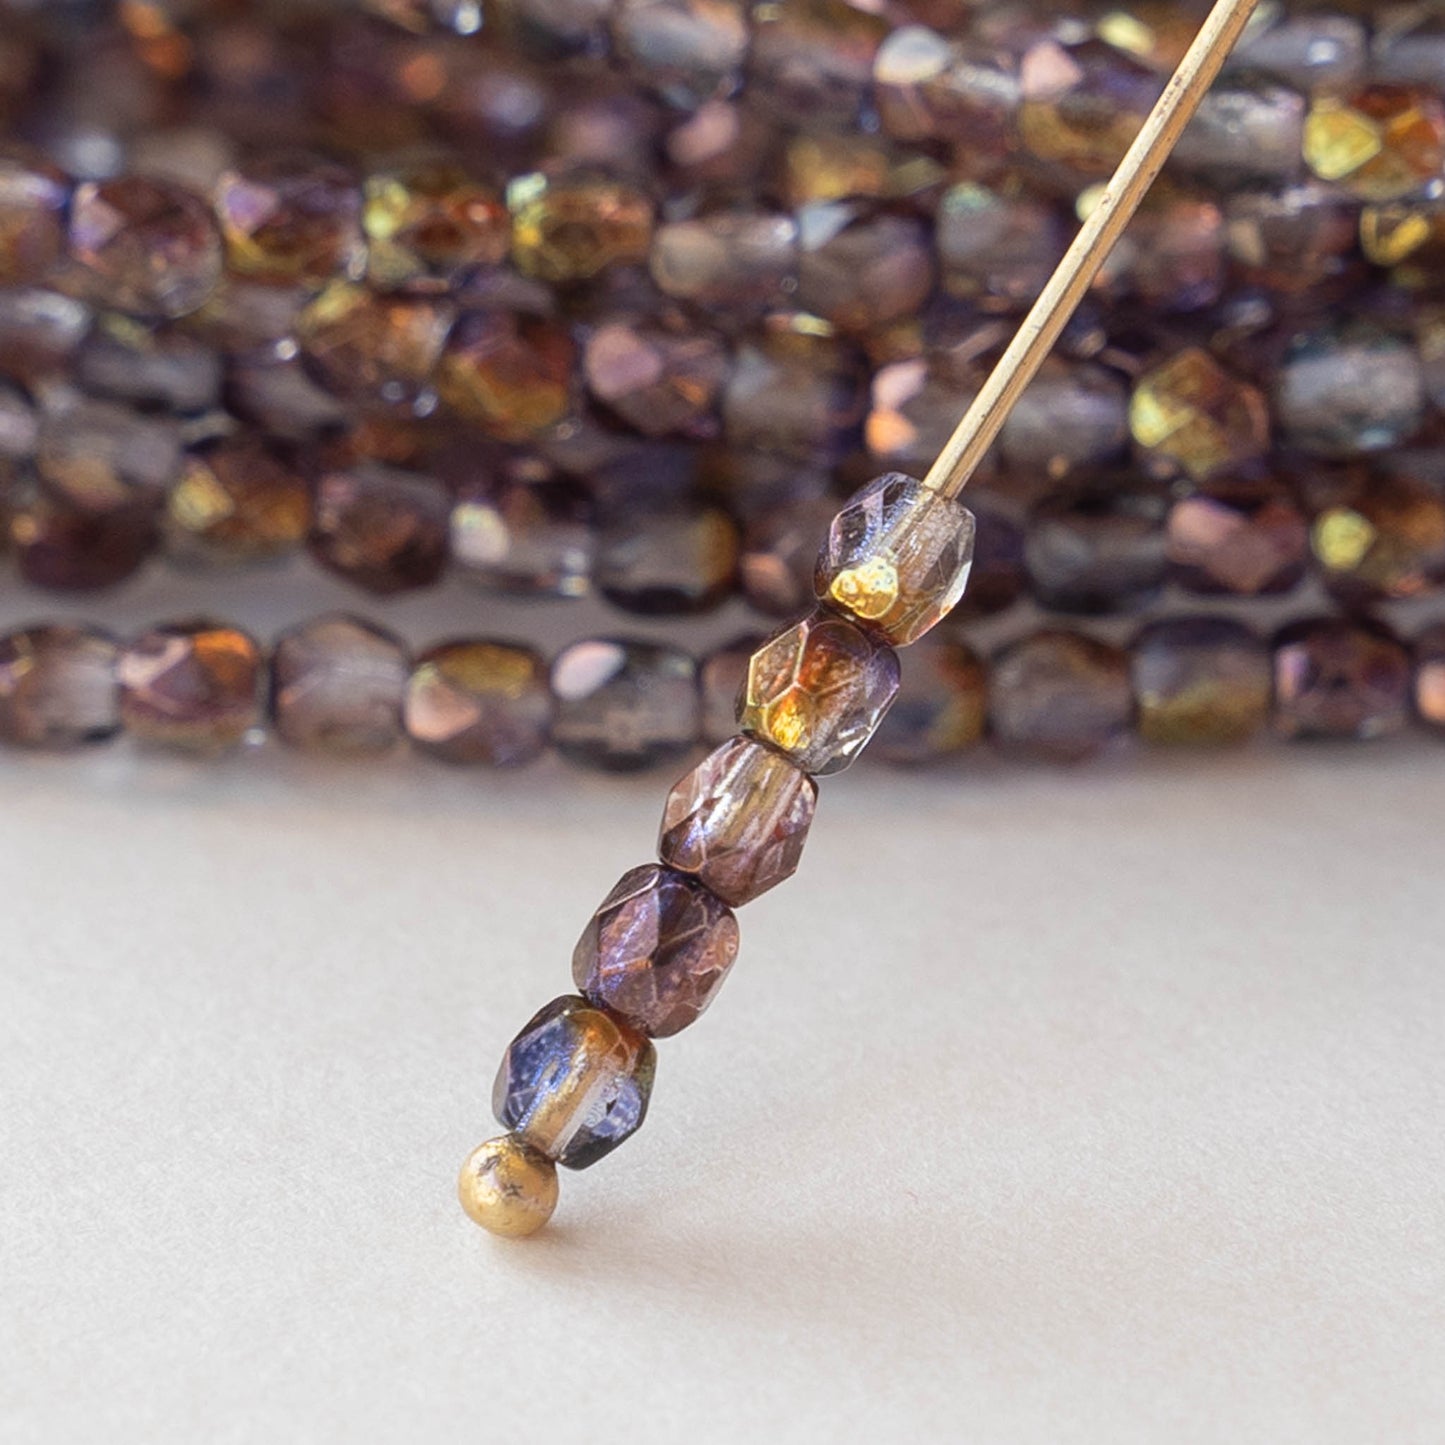 3mm Round Beads - Mulberry Mix with a Luster Finish - 50 beads